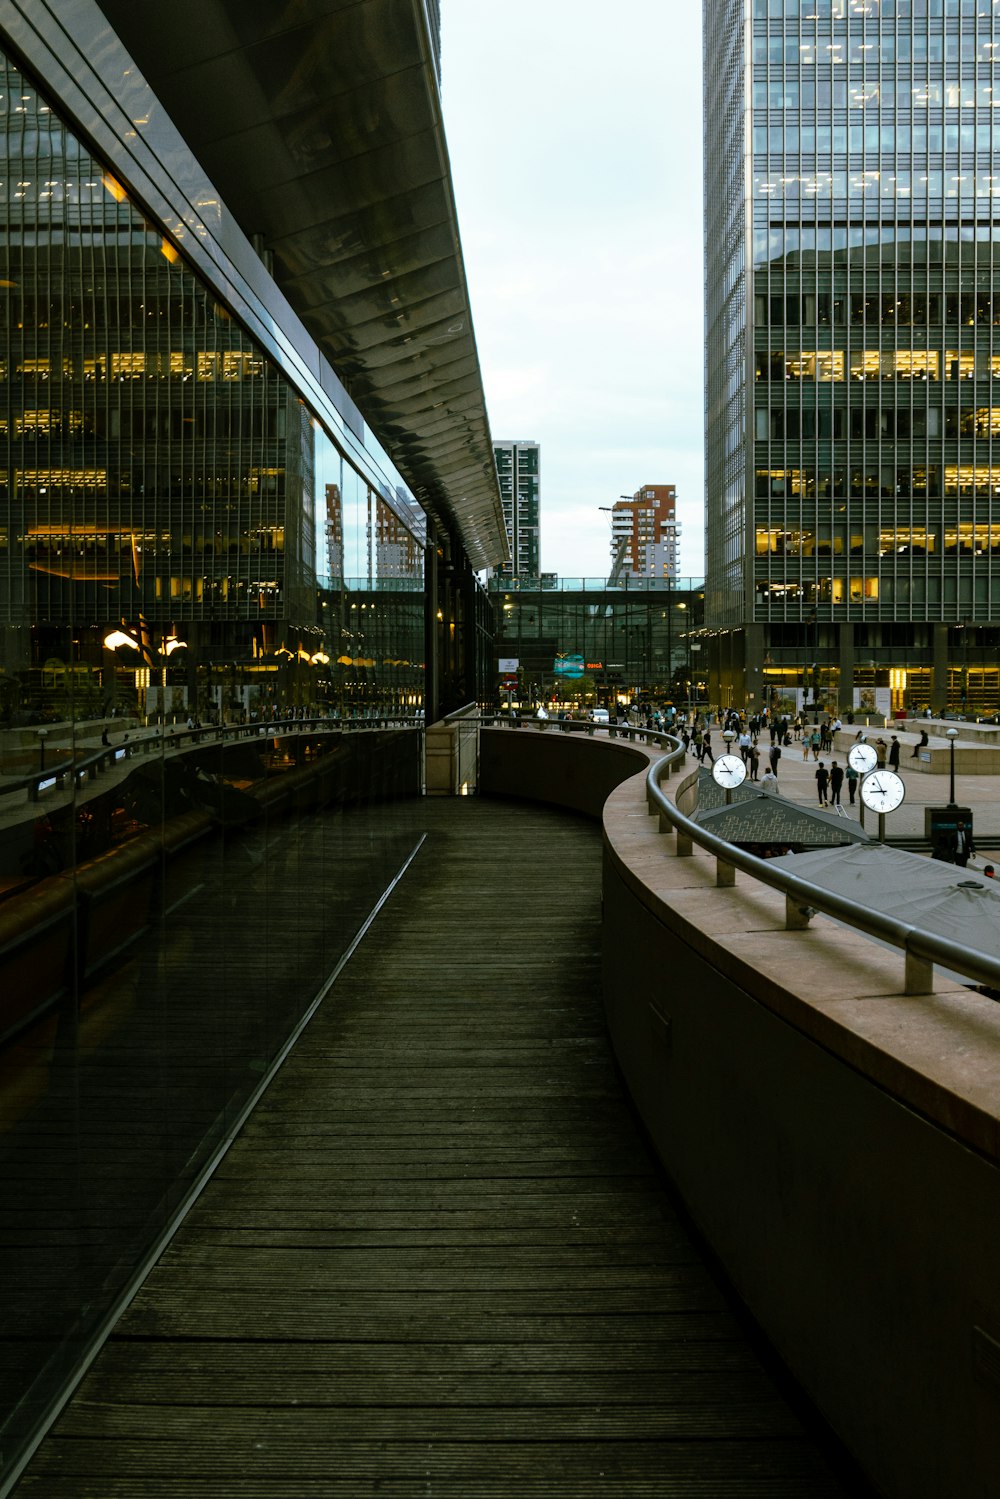 a walkway in a city with tall buildings in the background